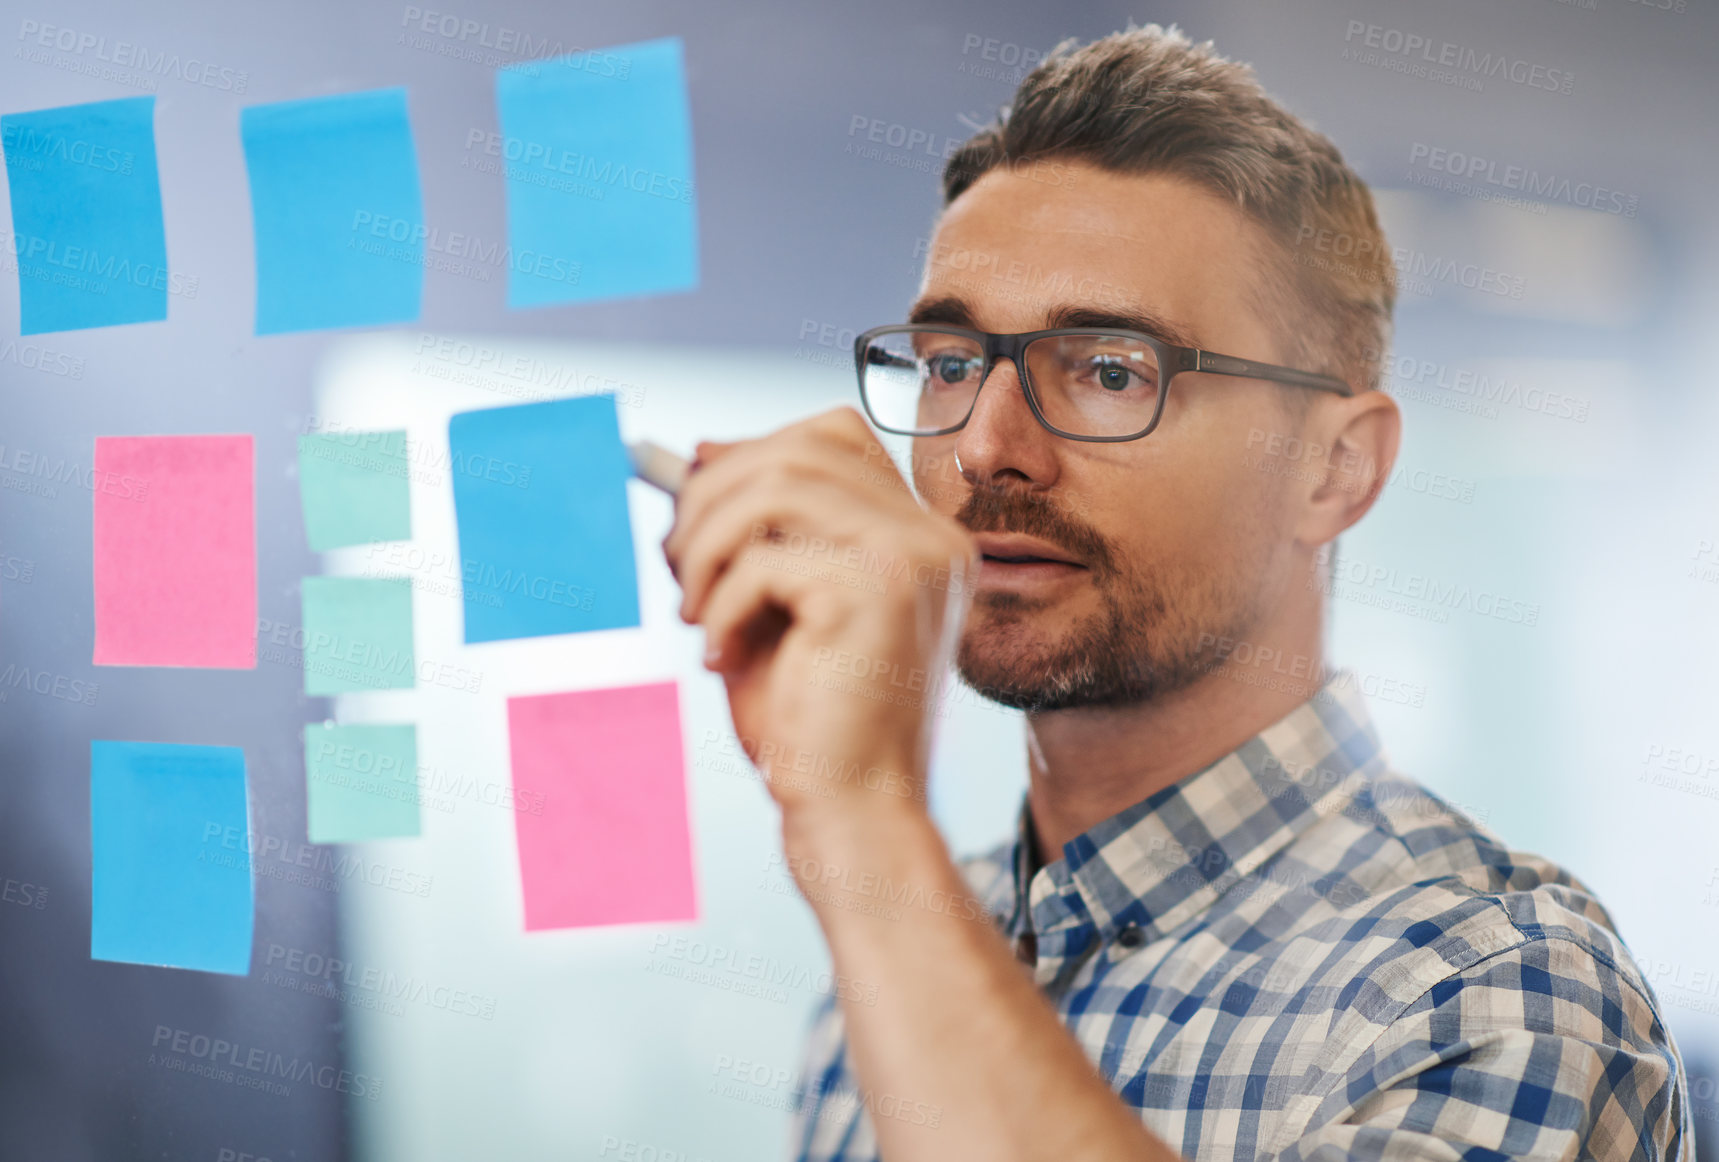 Buy stock photo Shot of a male designer writing on sticky notes stuck a glass wall